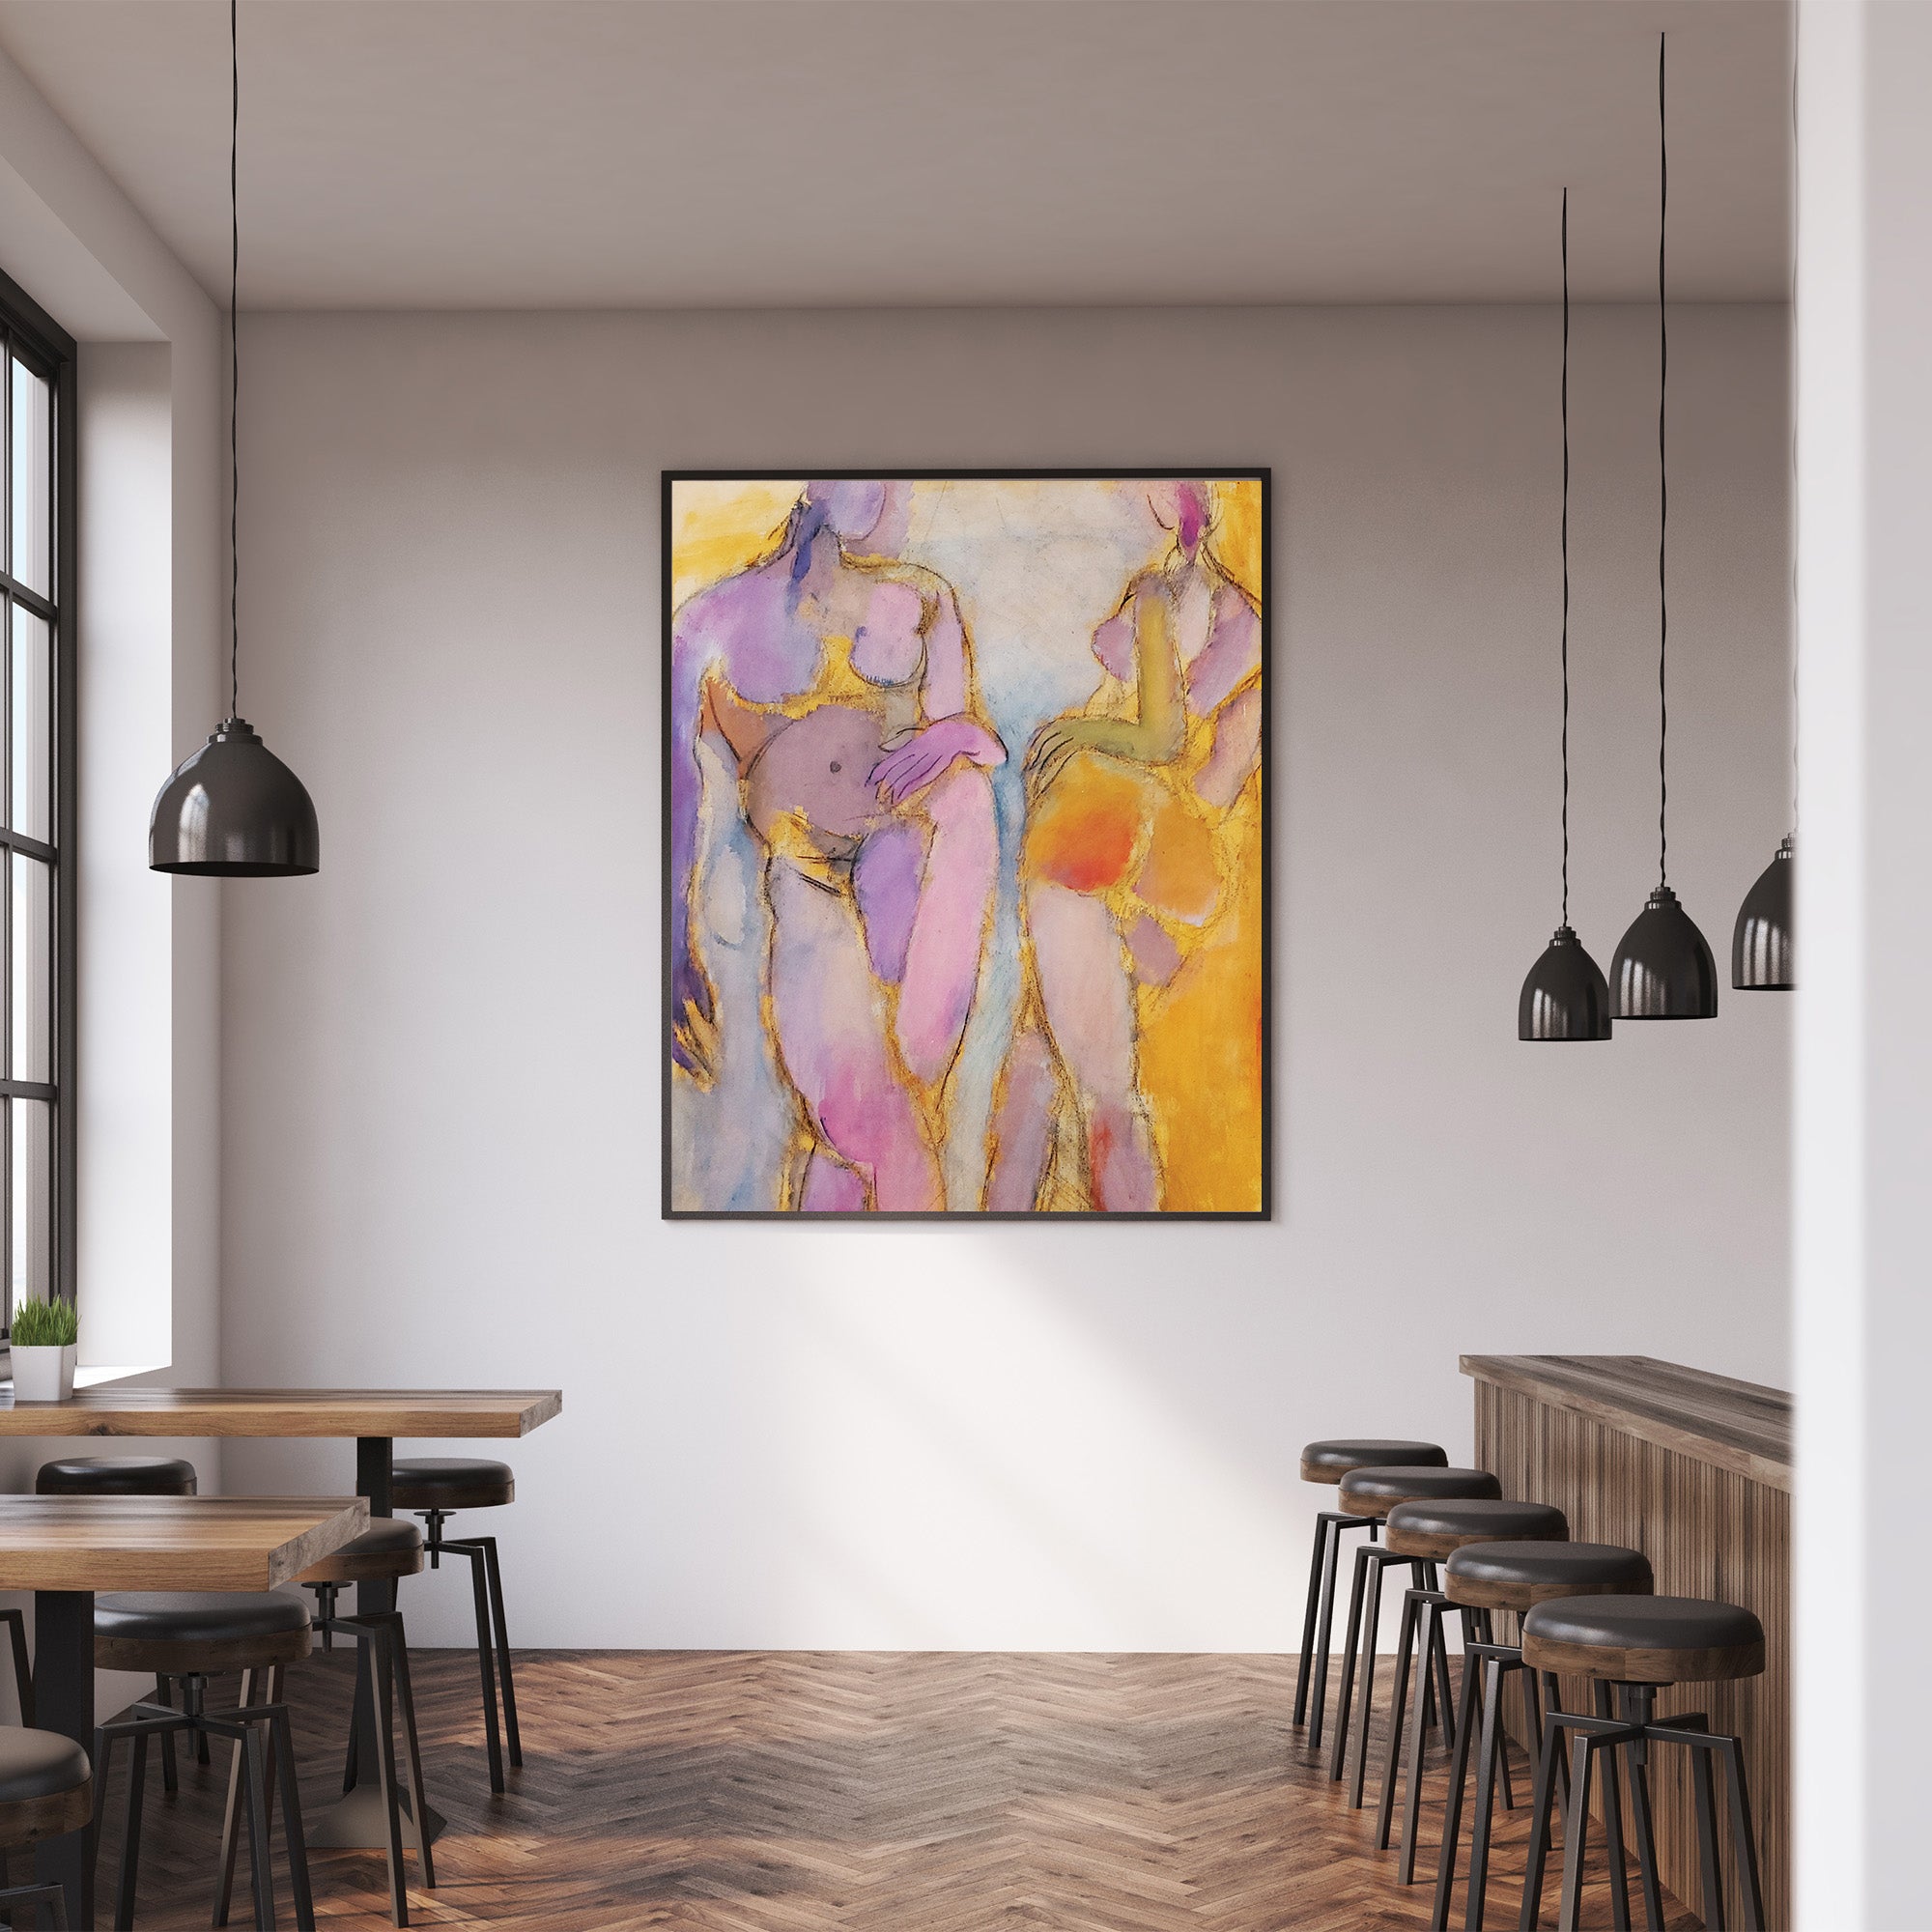 Step into the world of Yi-li Chin Ward's mesmerizing artwork titled "Conversation," where the warmth of human connection is beautifully encapsulated. This piece masterfully captures a moment of intimacy and relatedness through loose sketching and a vibrant color palette.